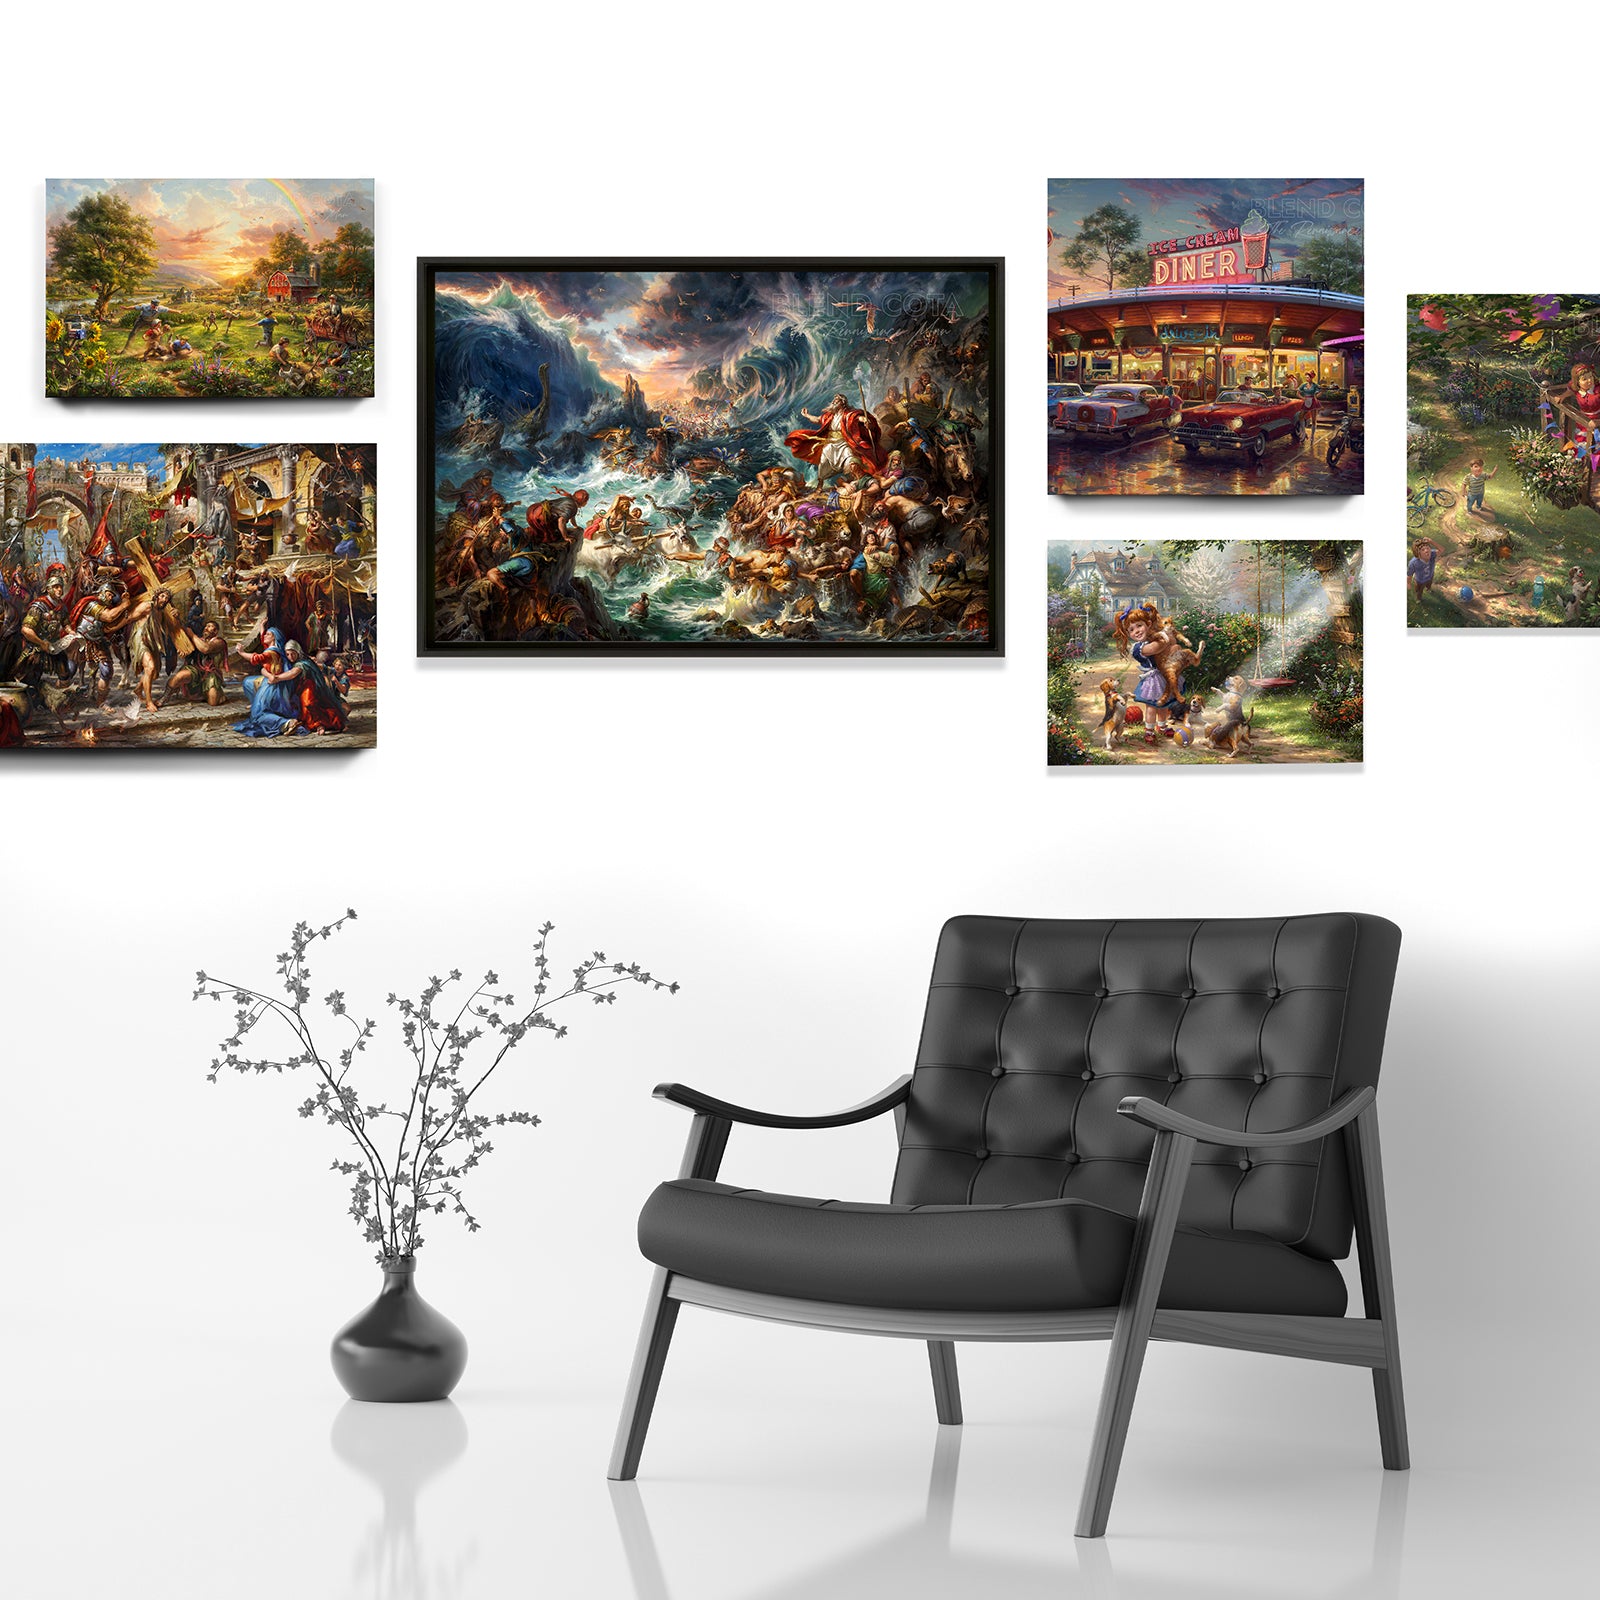 variety of art prints available size large to small paintings showcase renaissance revival images paintings and art pieces in a room setting - Blend Cota original oil painting - renaissance revival - blend cota studios art